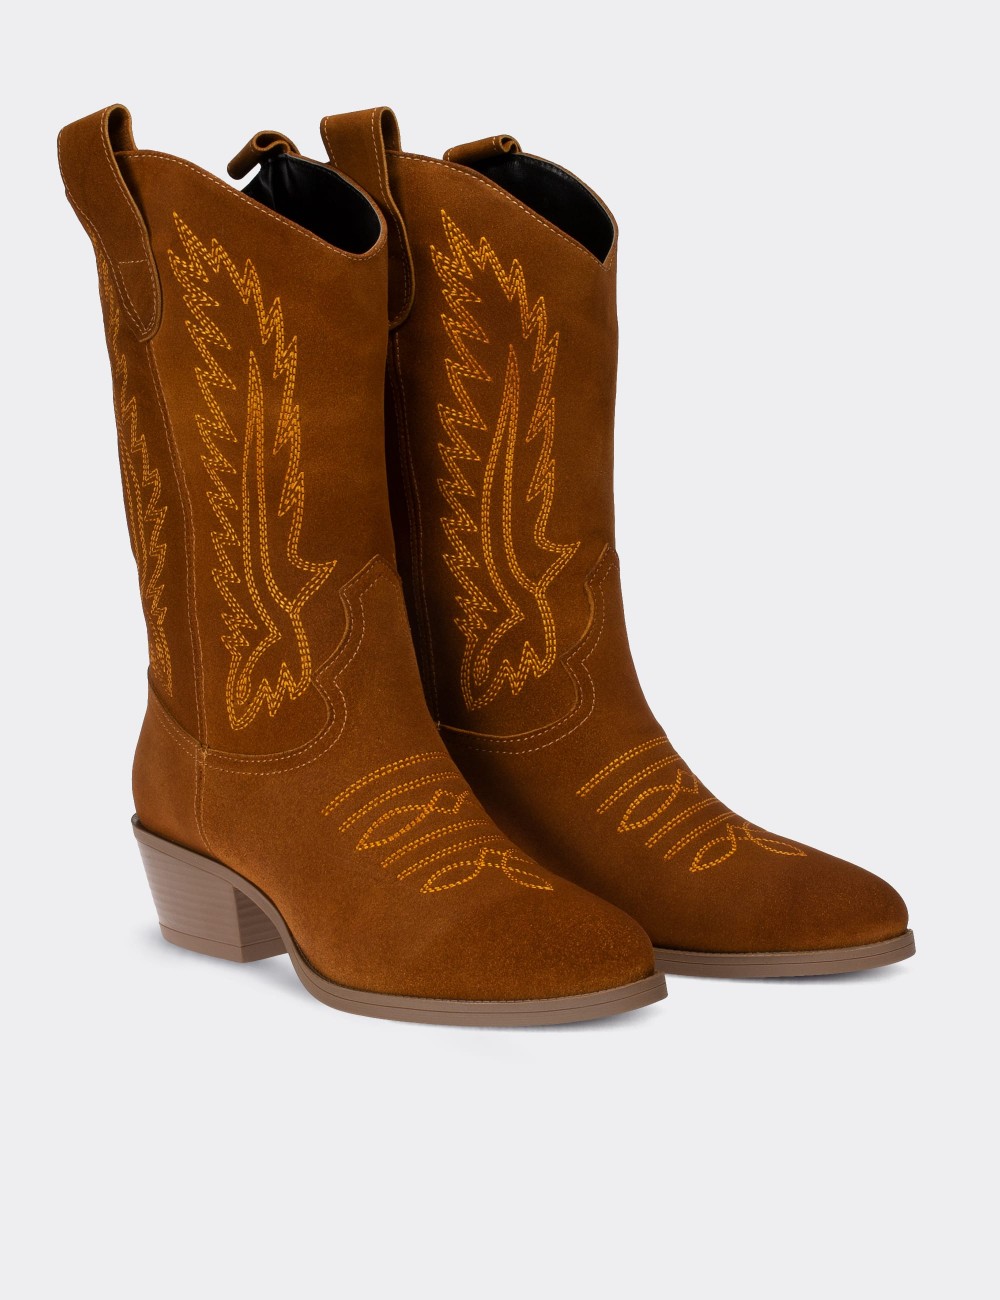 Tan Suede Leather Boots - E8002ZTBAC02